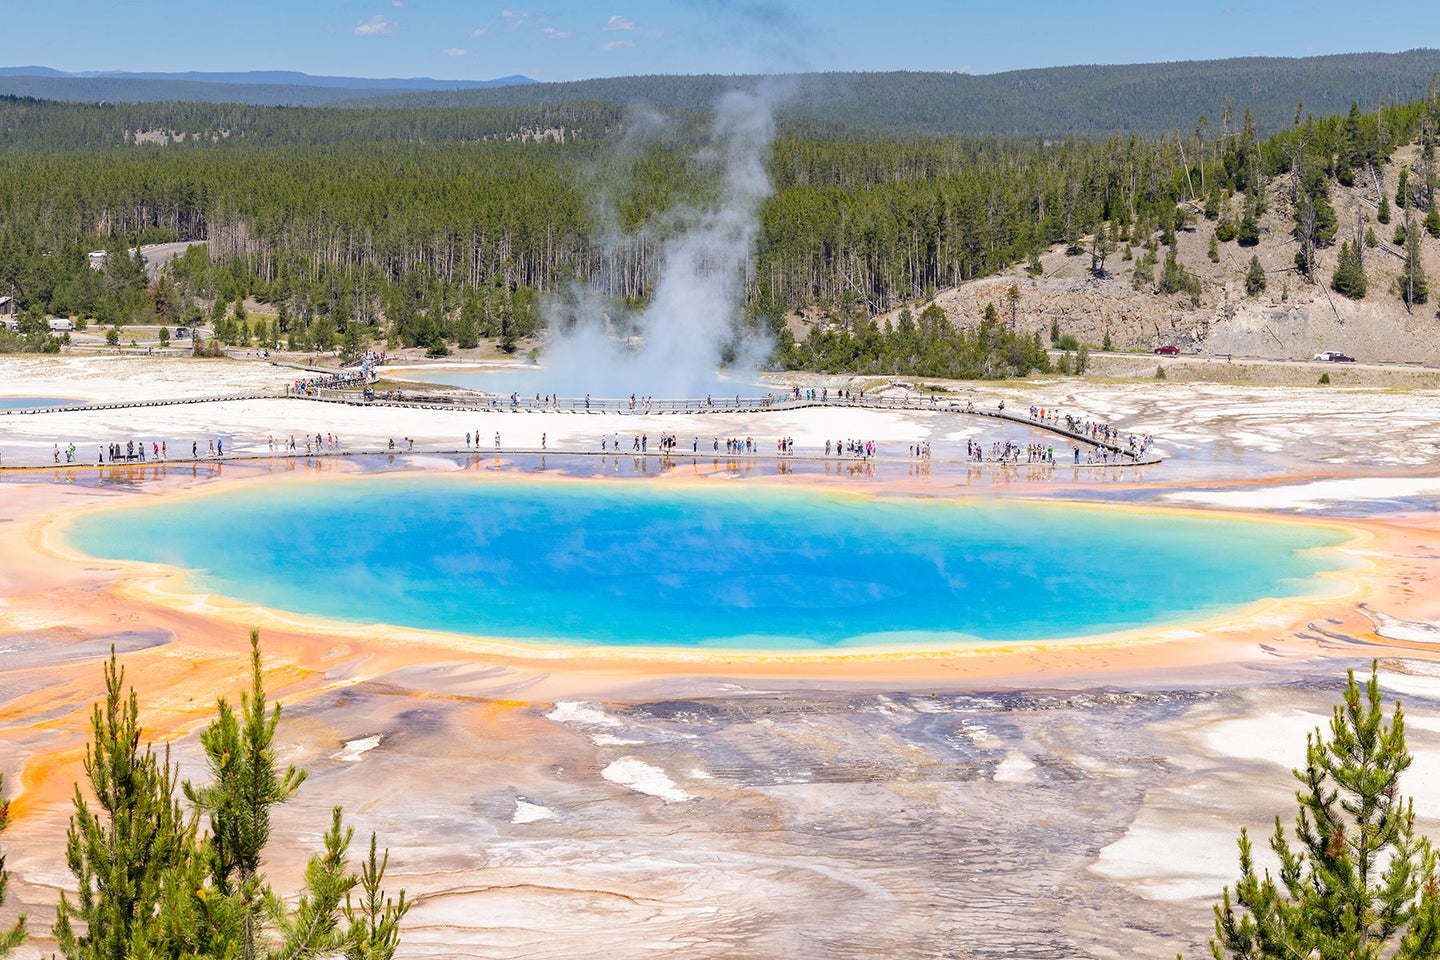 Yellowstone National Park is a hotbed of geothermal activity.